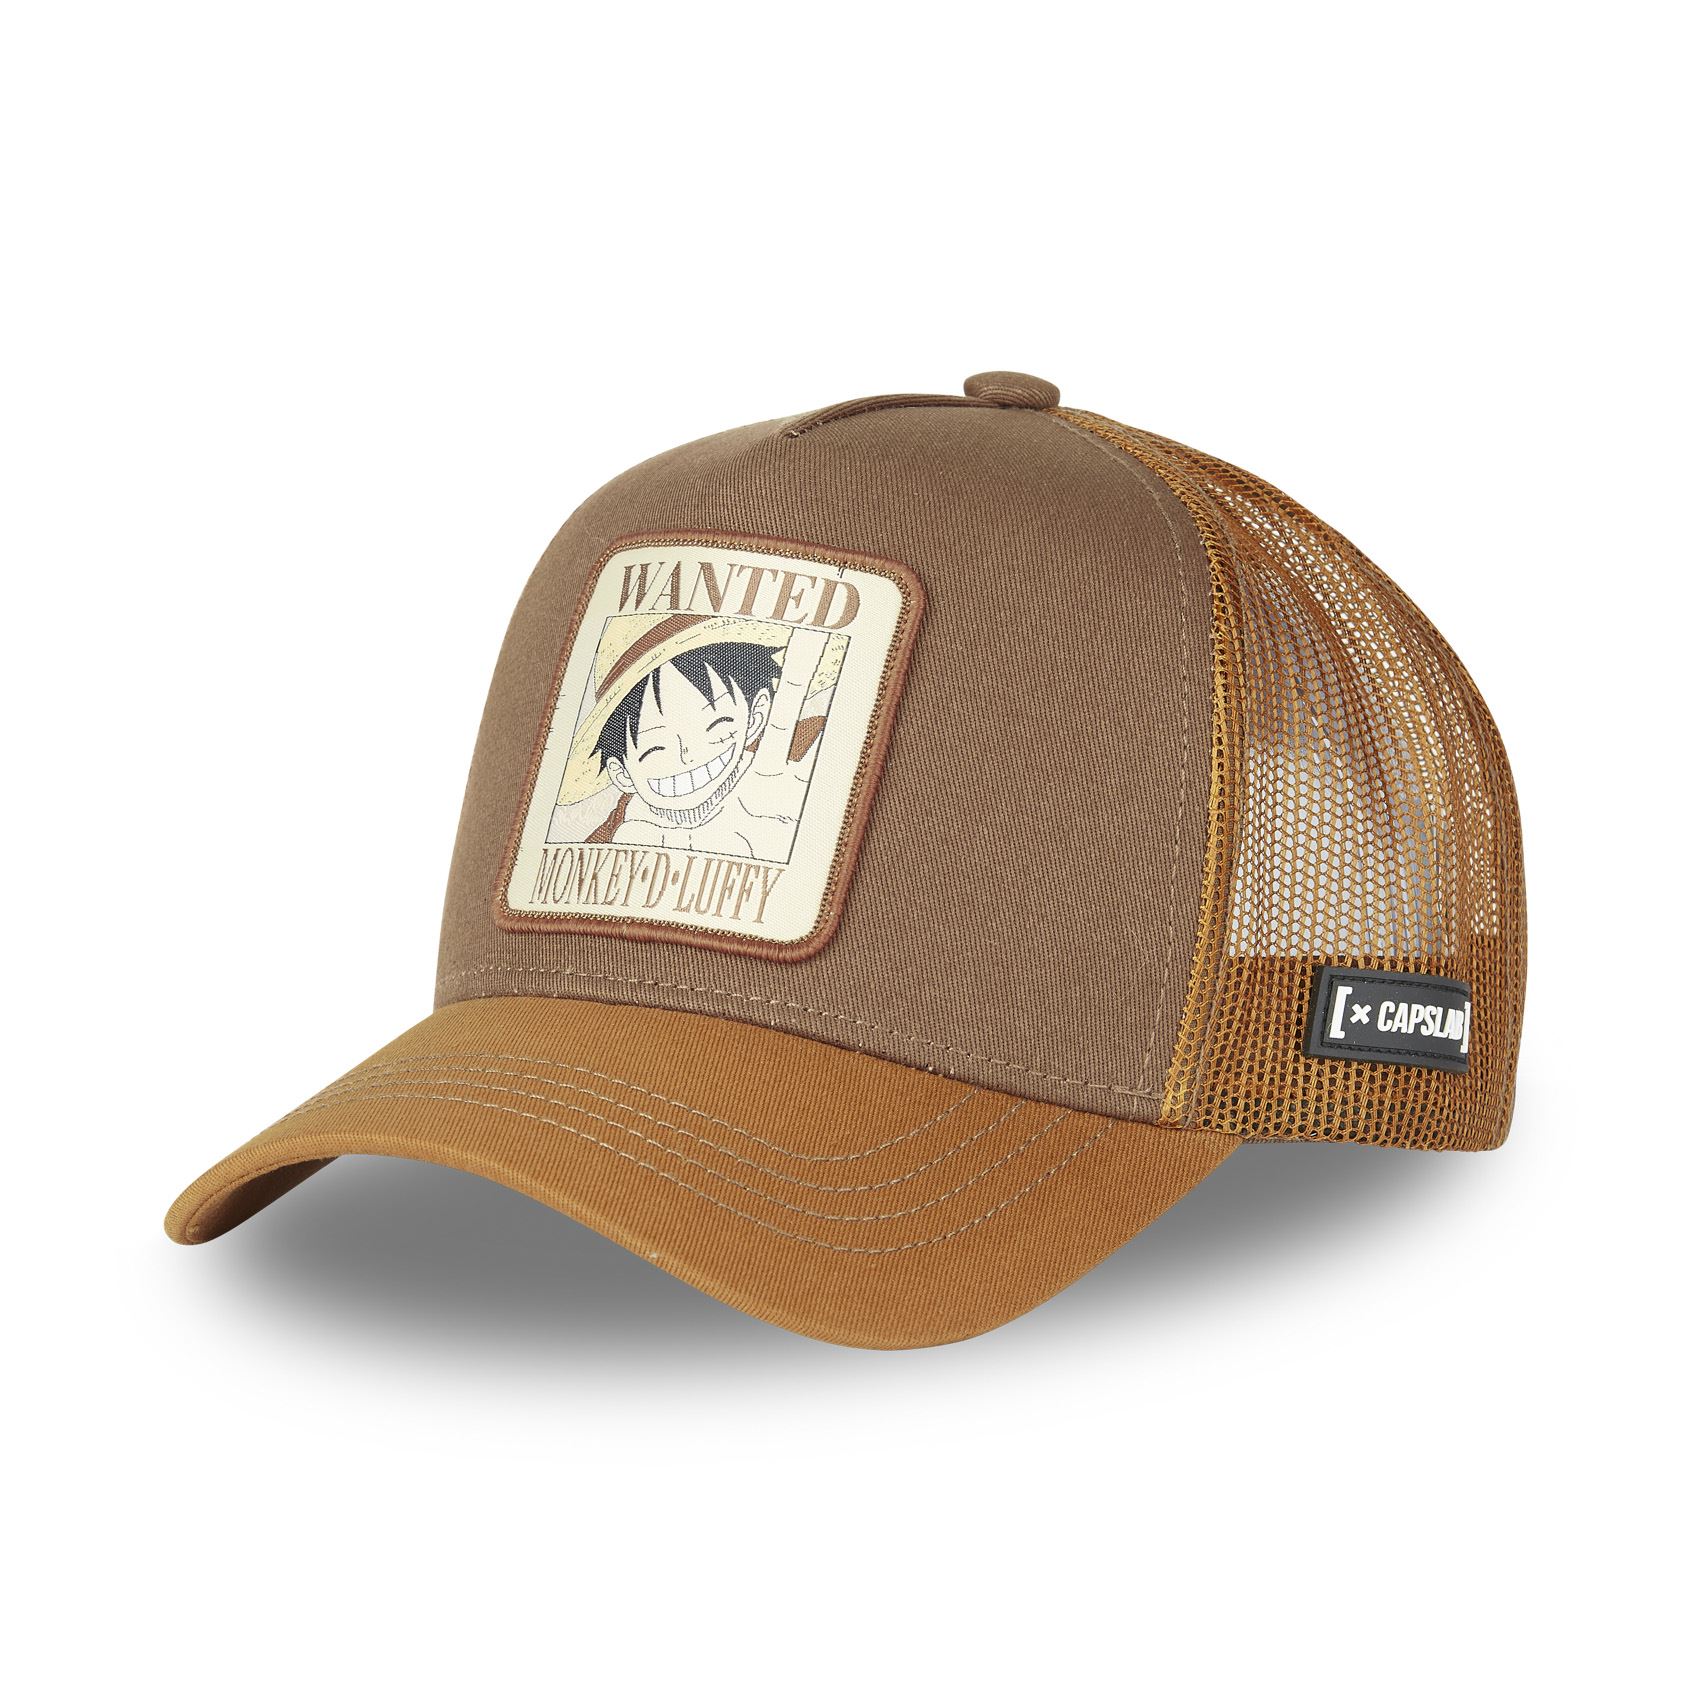 Wanted Luffy One Piece Brown Trucker Cap Capslab